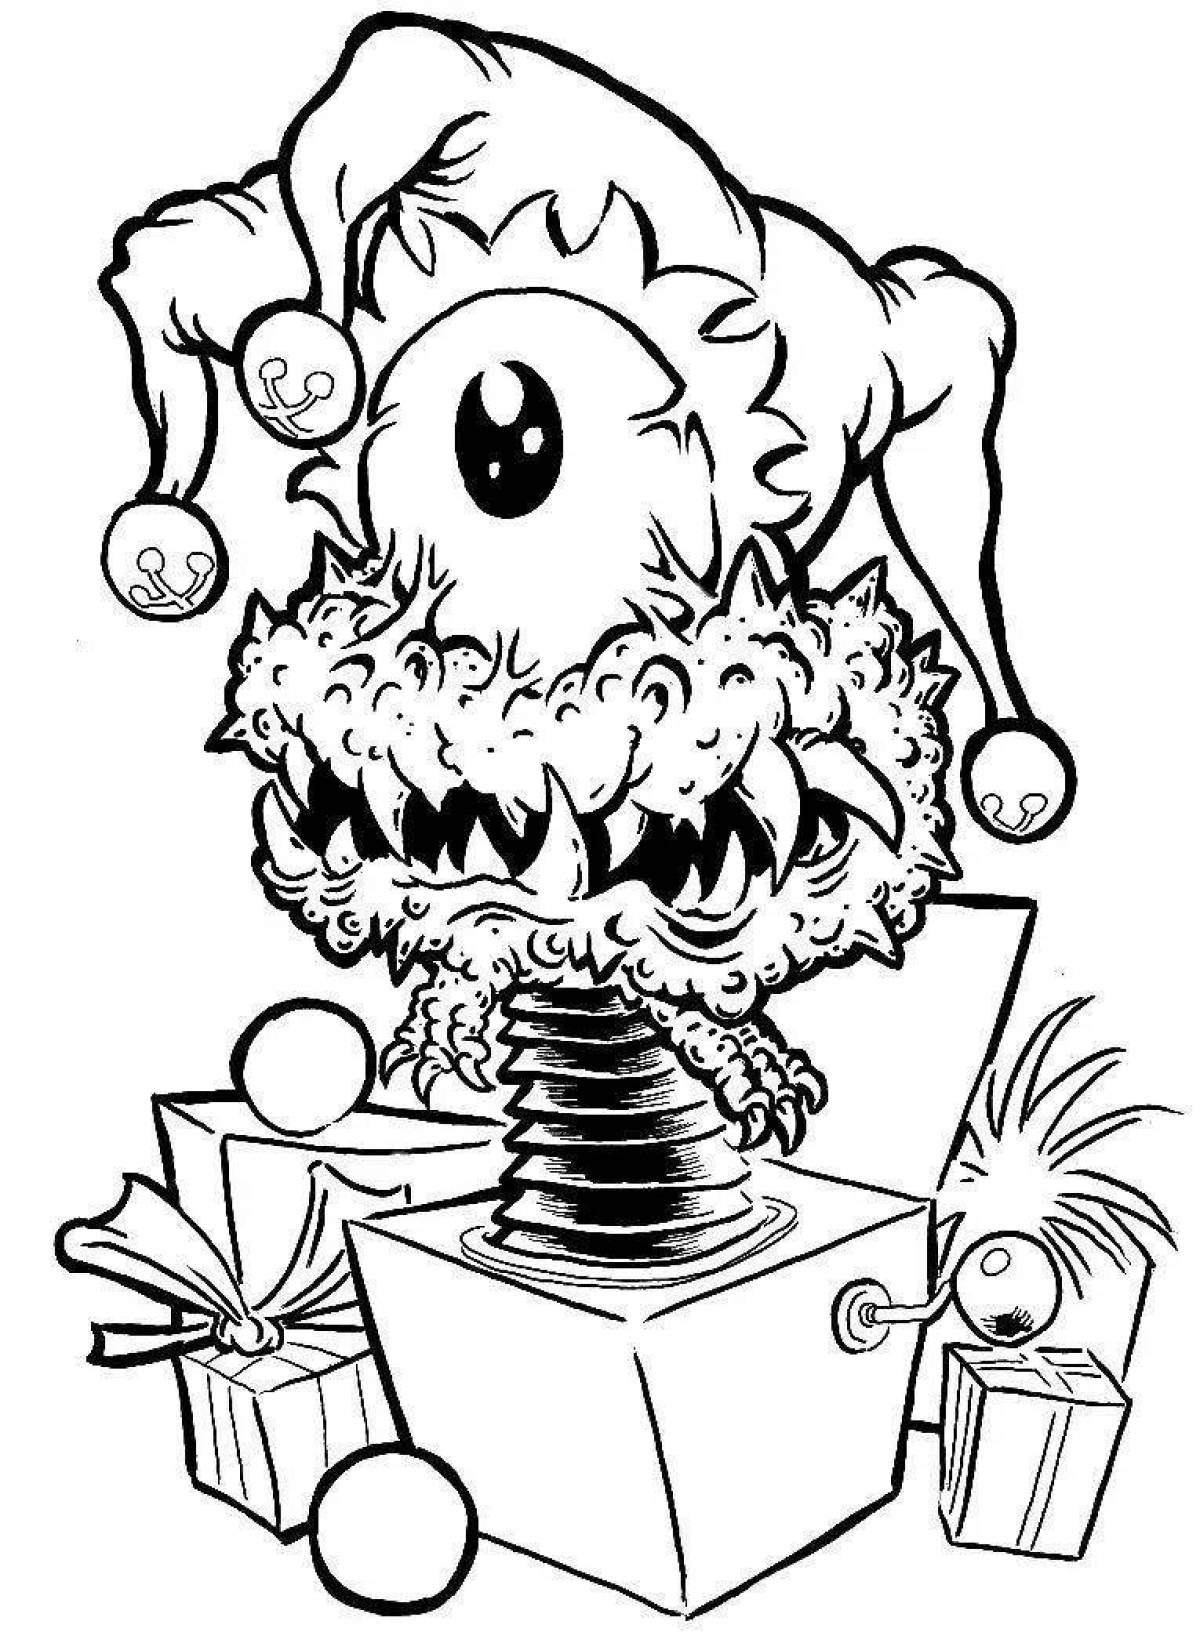 Spooky horror coloring page